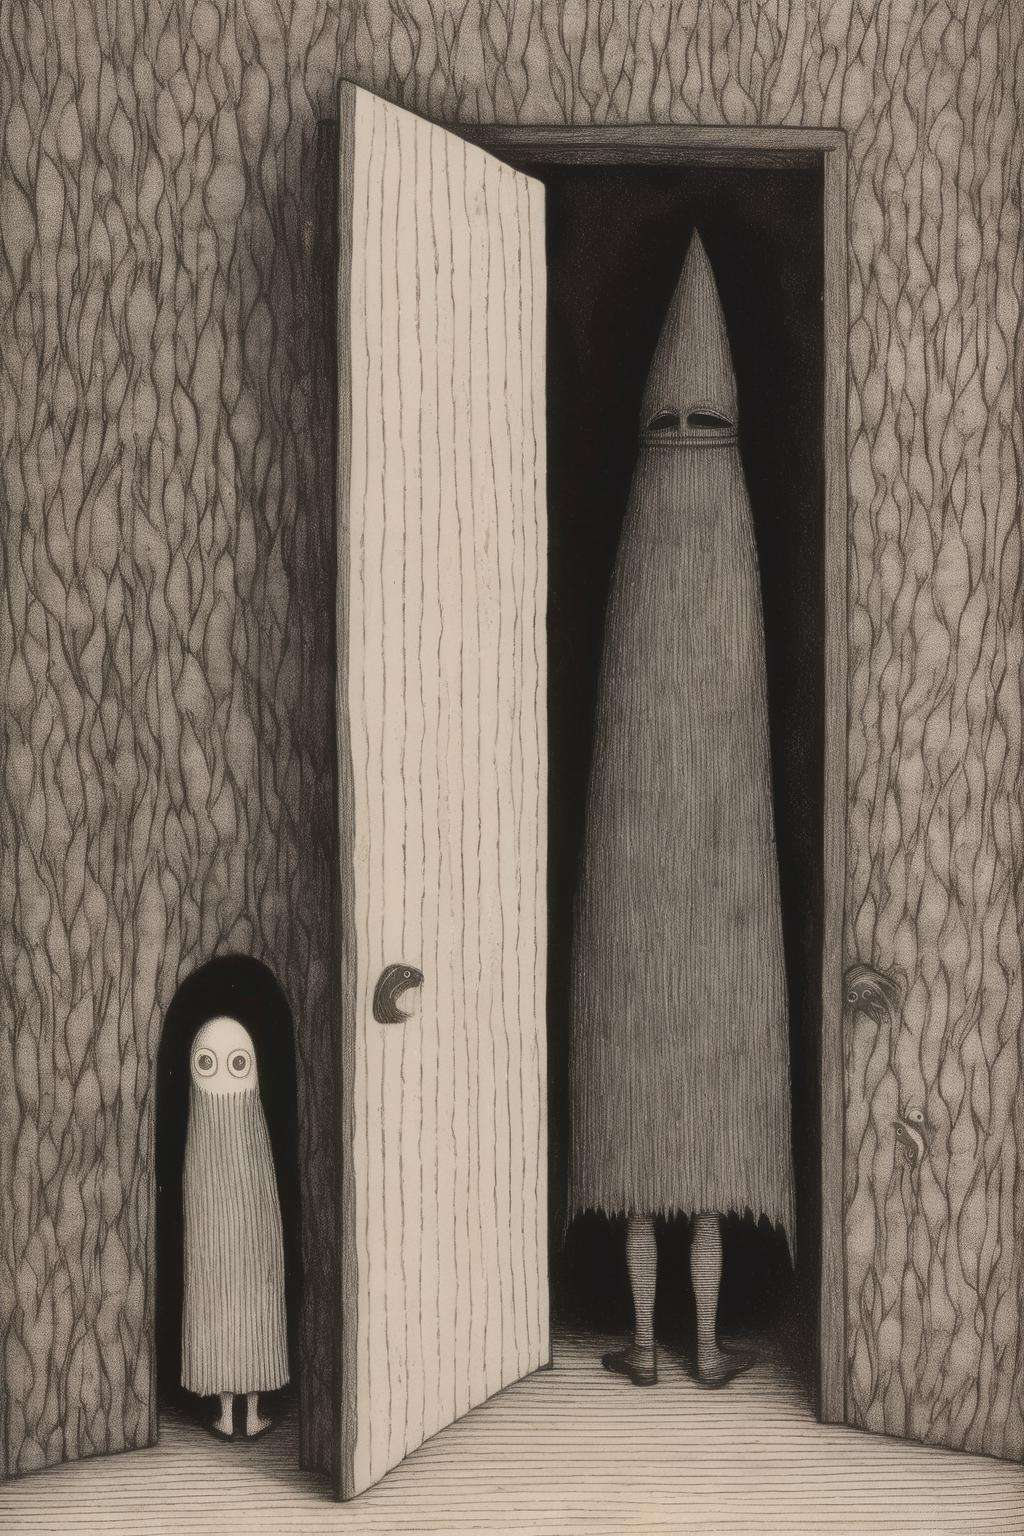 <lora:Edward Gorey Style:1>Edward Gorey Style - edawrd gorey drawing, children hiding in a closet with a villain outside